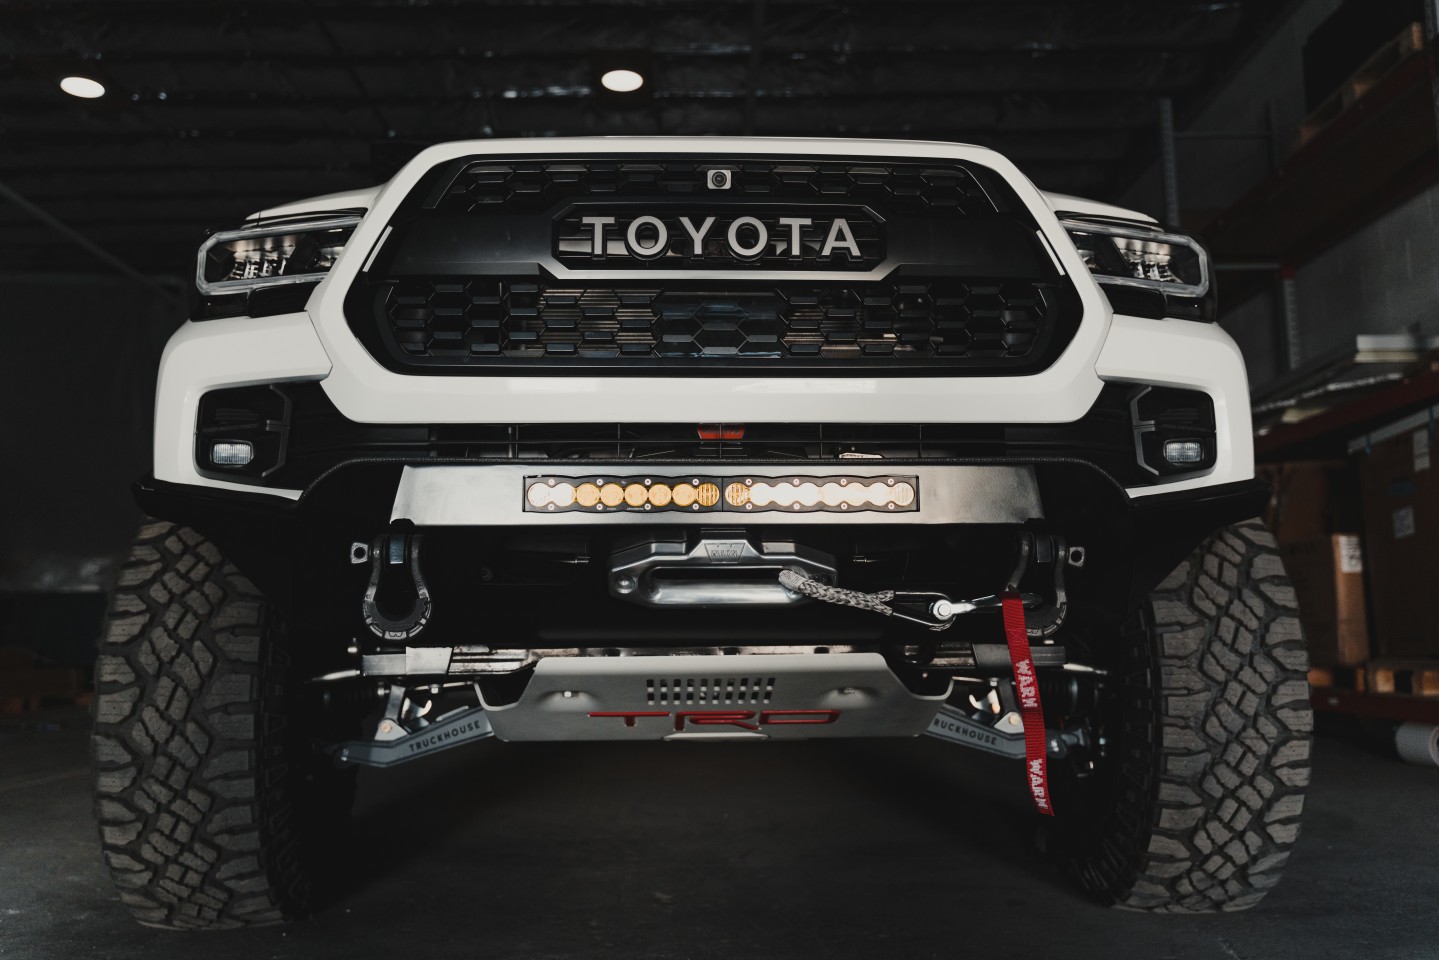 In addition to bolting its high-tech camper to the Tacoma, TruckHouse adds some improvements to the truck's mechanicals, including a long-travel front suspension